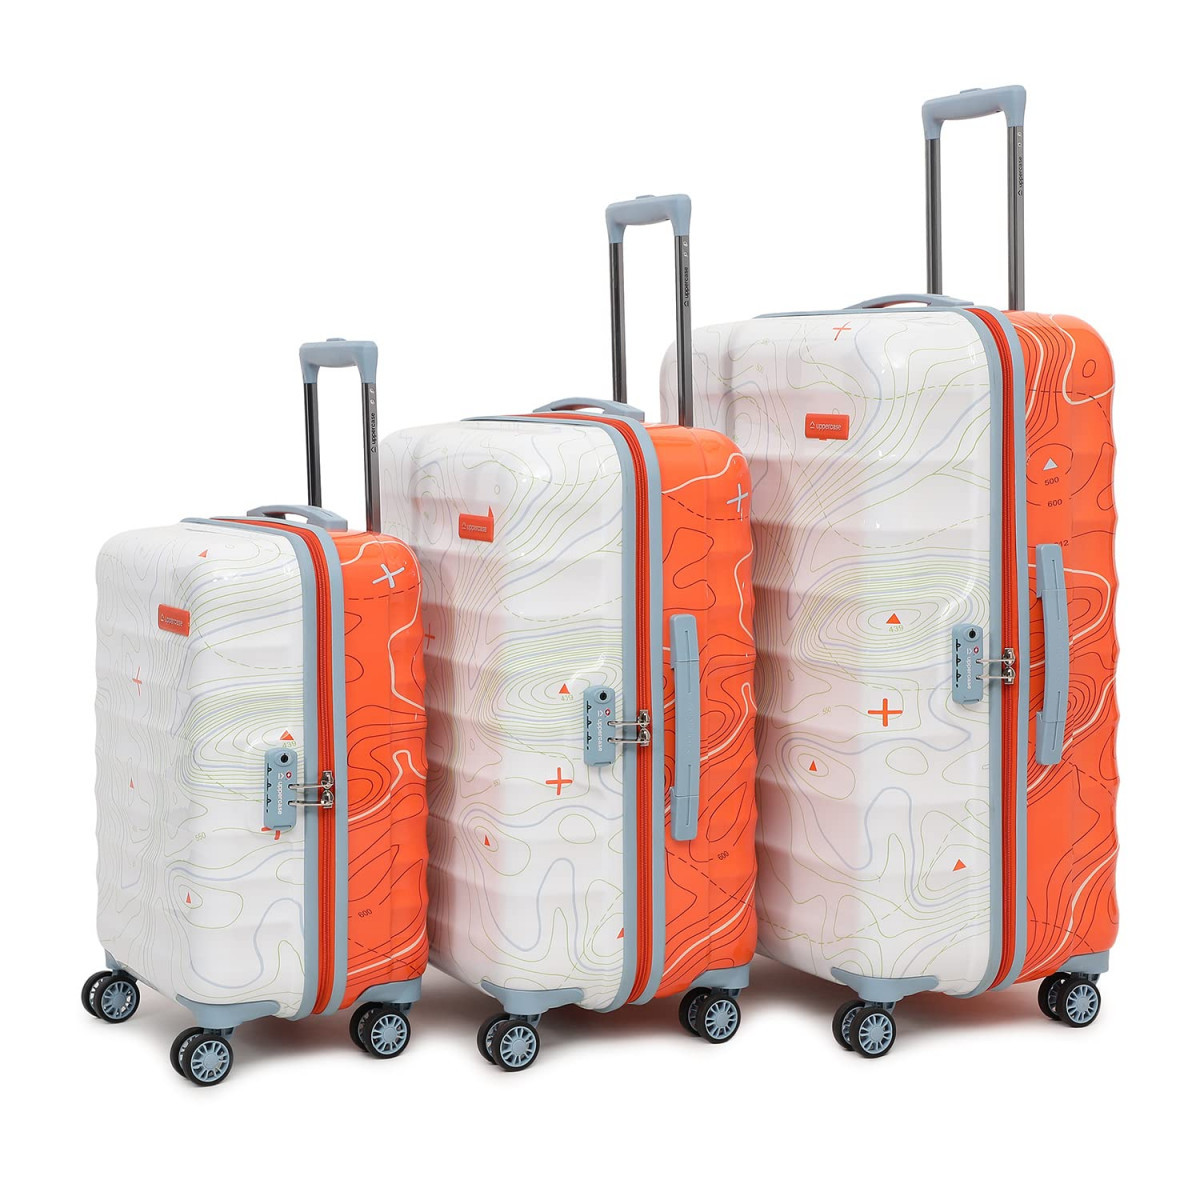 uppercase Topo Trolley Bag Set Of 3 SML Hardsided Polycarbonate Luggage Tsa Lock  Anti-Theft Zippers Spinner Cabin Check-In Luggage 2000 Days Warranty Orange  White 31 X 53 X 755 Cm